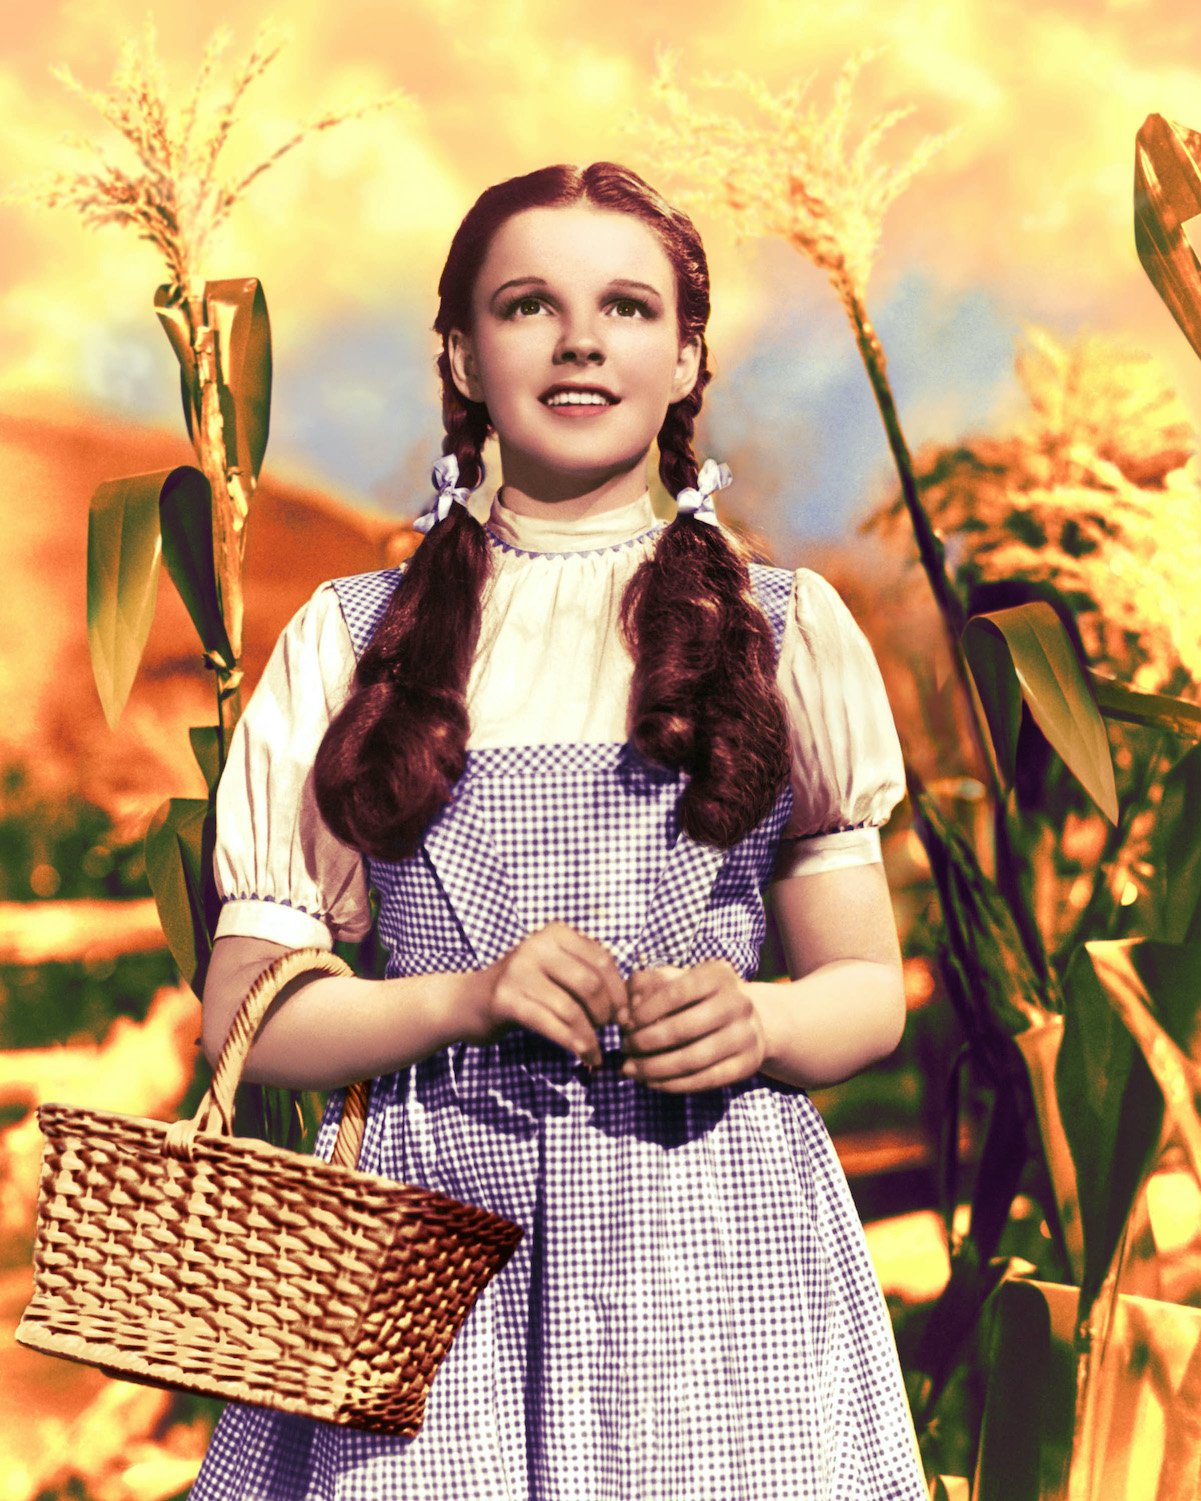 Judy Garland in 'The Wizard of Oz' 